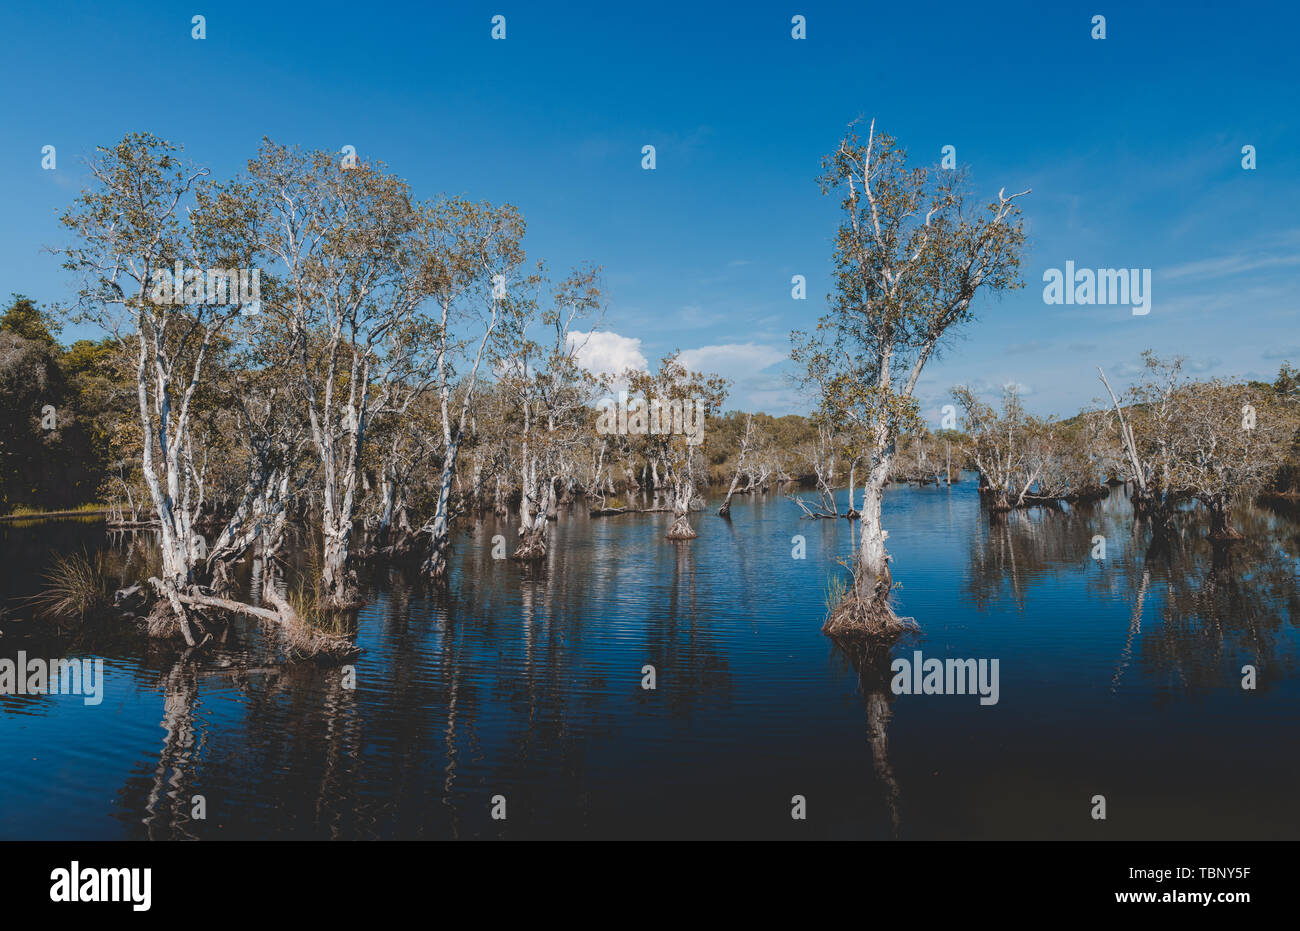 Environment of botanical garden wetland trees and dark water with sun lighting and blue sky. Stock Photo